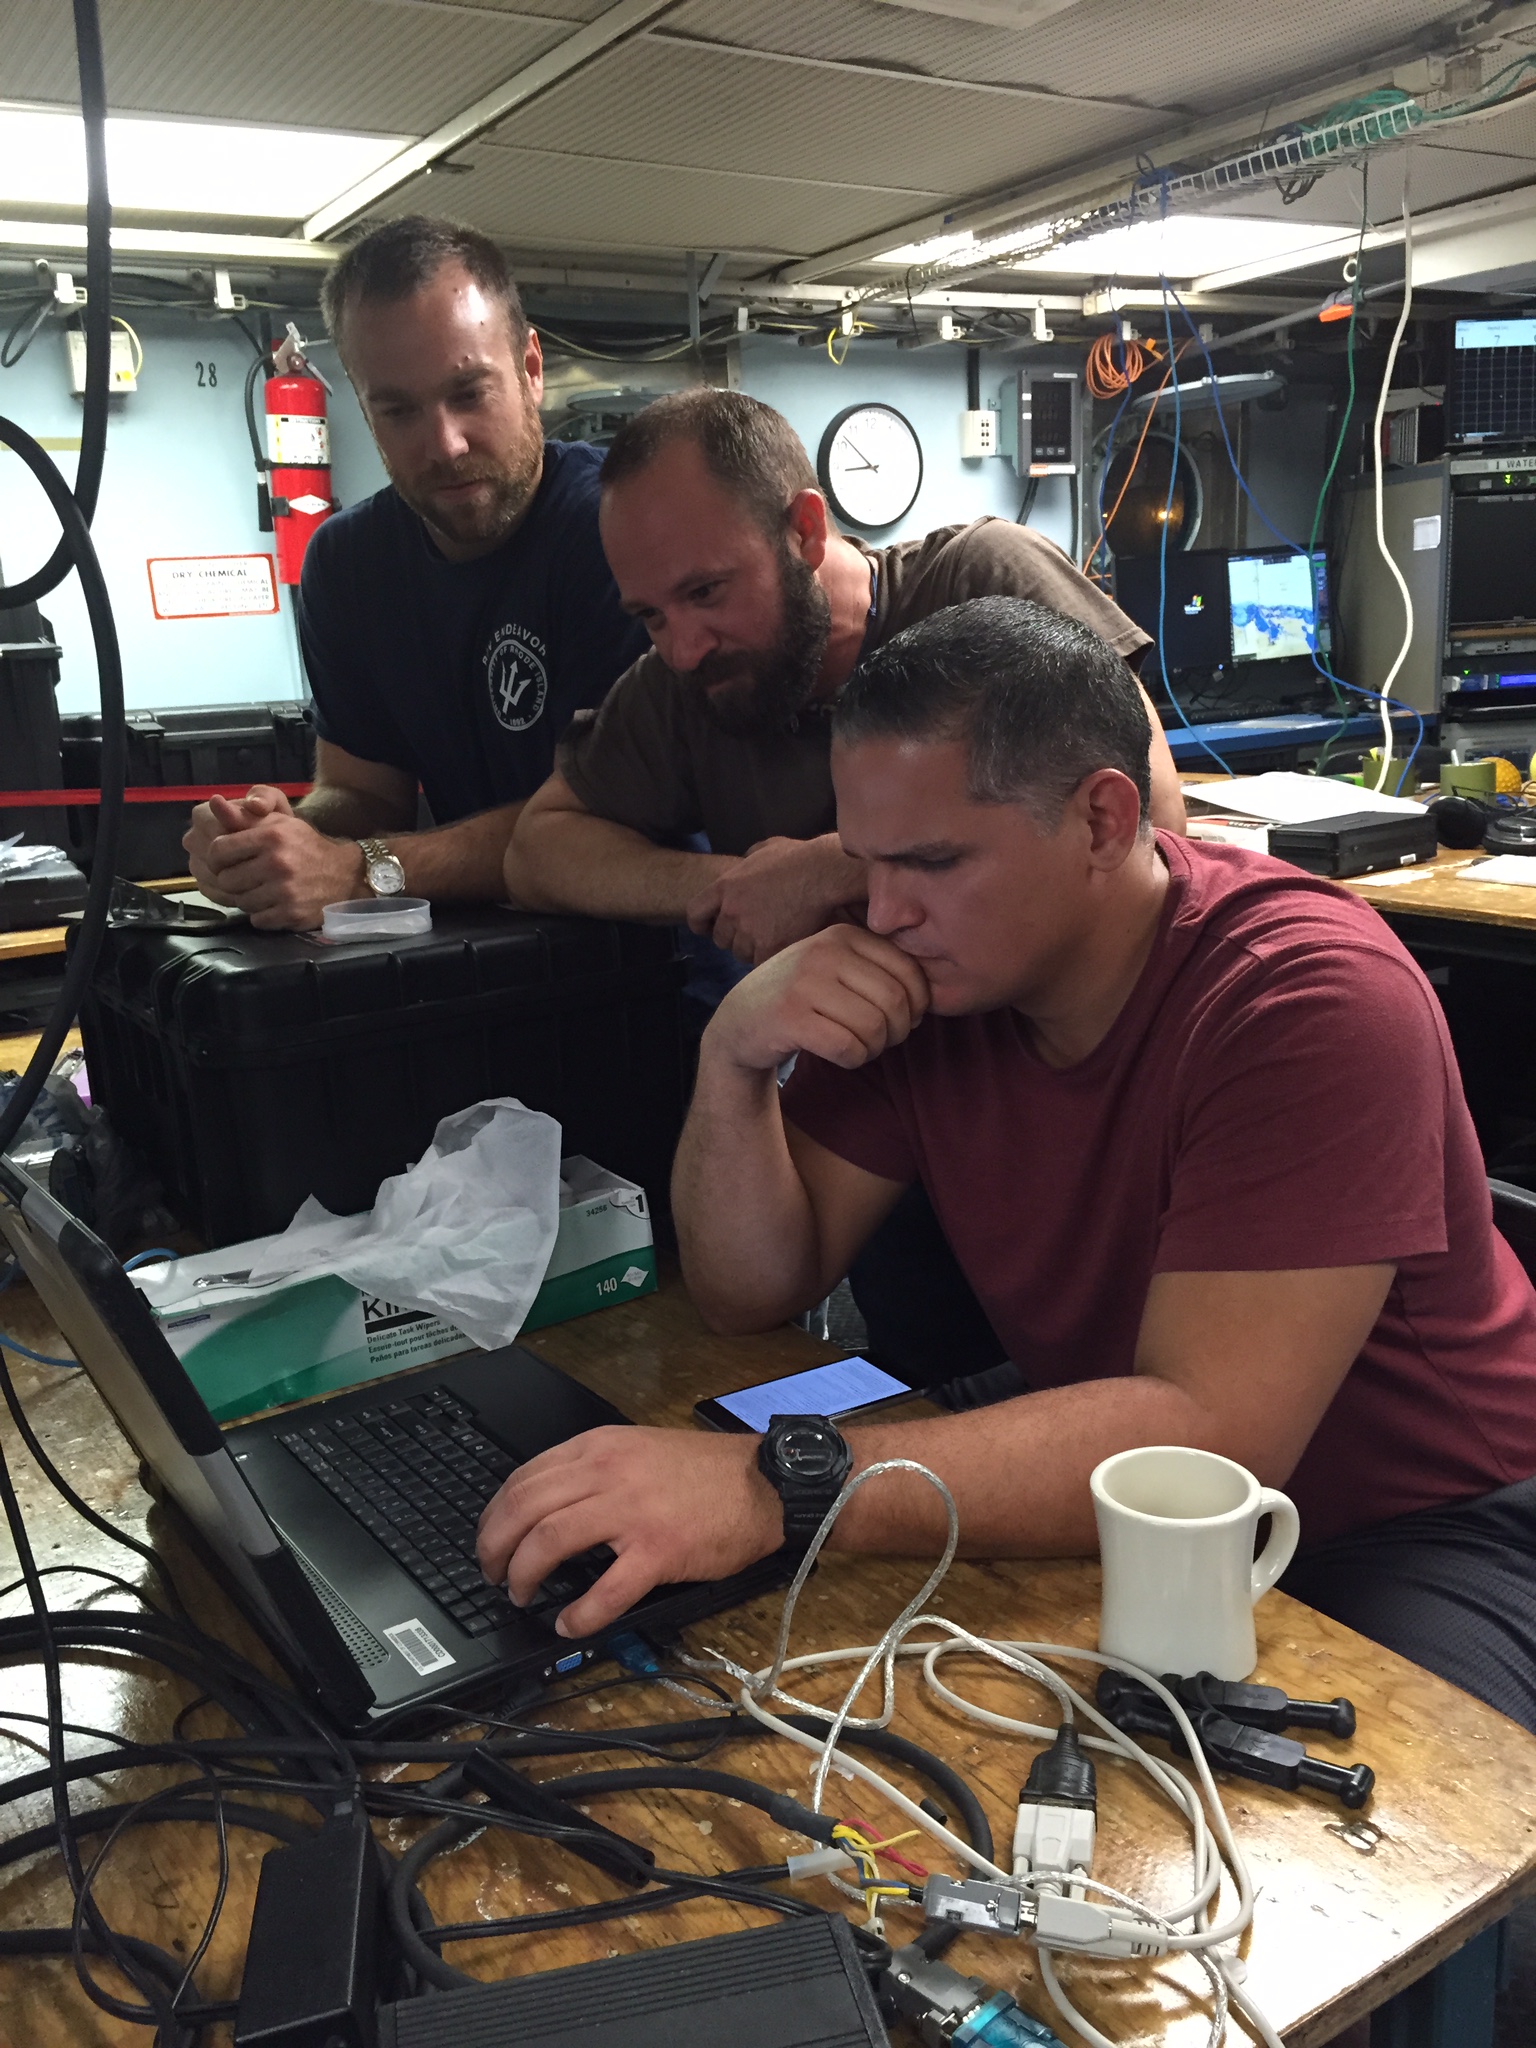 The team reviewing the CTD data on R/V Endeavor. Image credit: NOAA